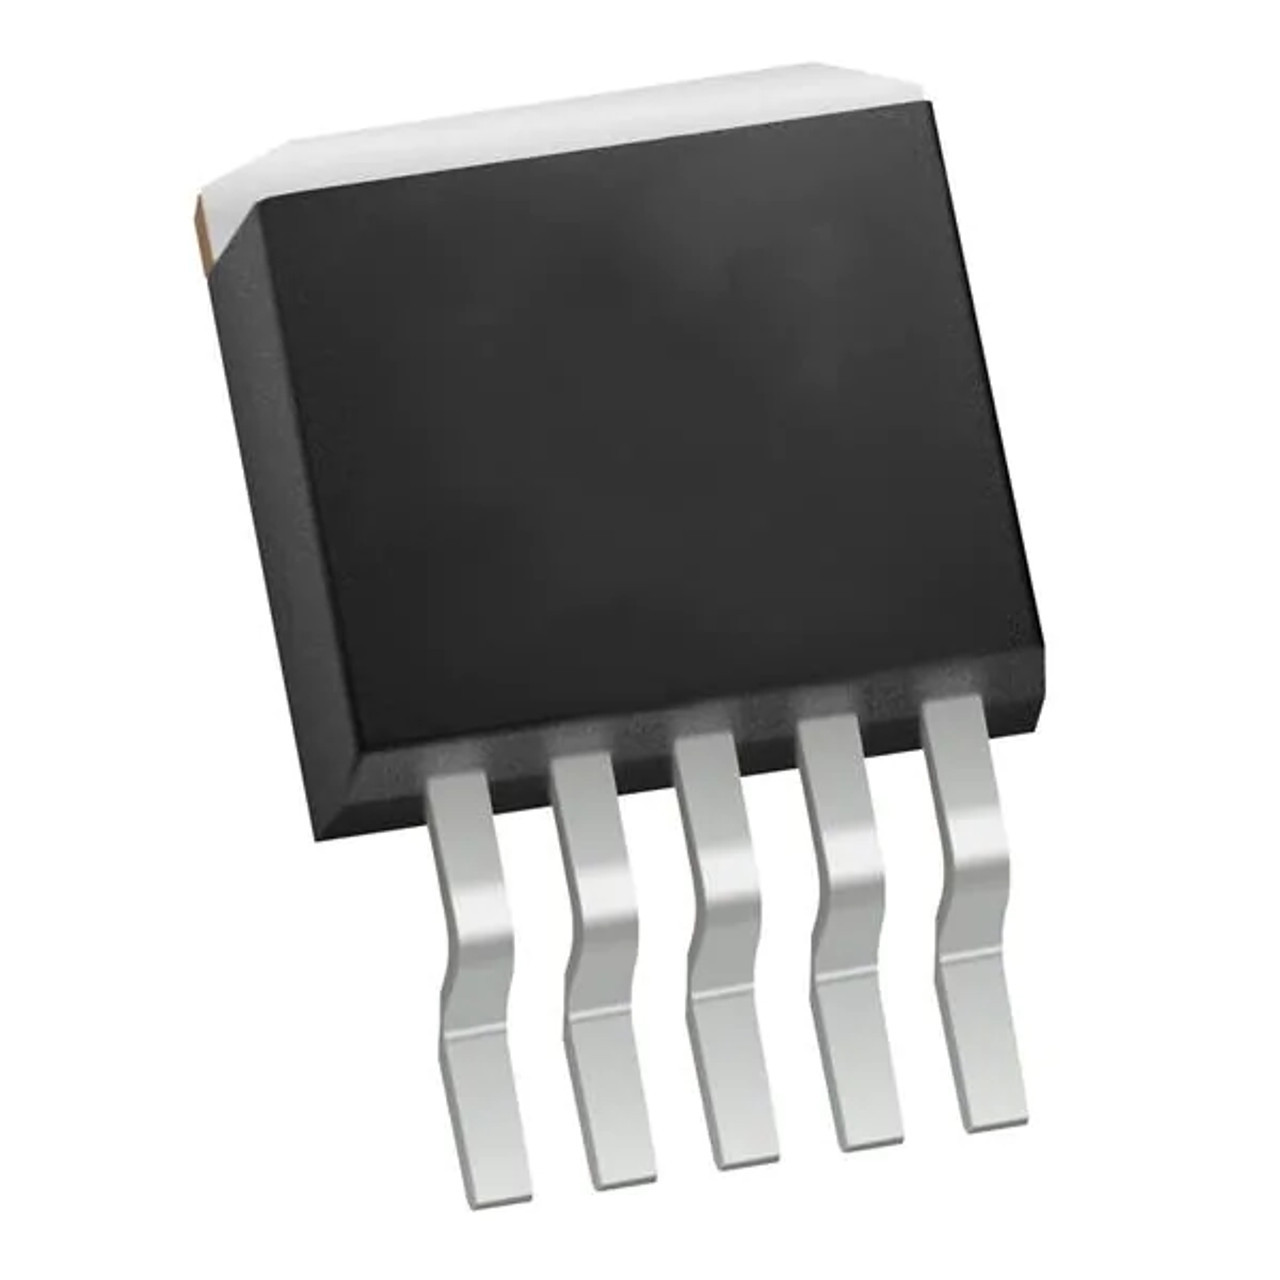 LM2575S-5.0 ; Step-Down Voltage Regulator 1A, TO-263-5